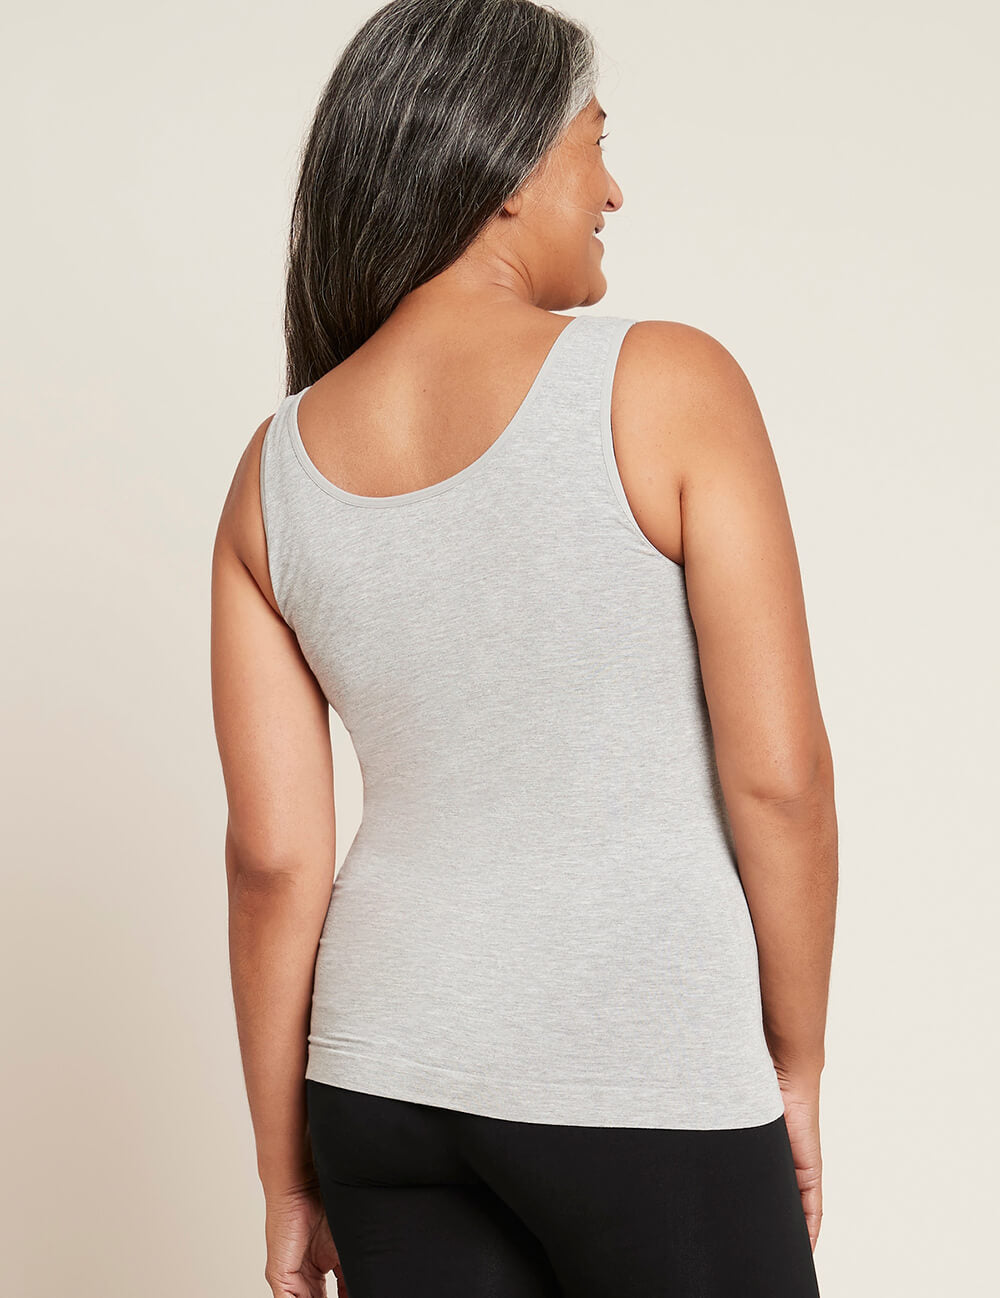 Boody Bamboo Women's Tank Top in Light Grey Back View